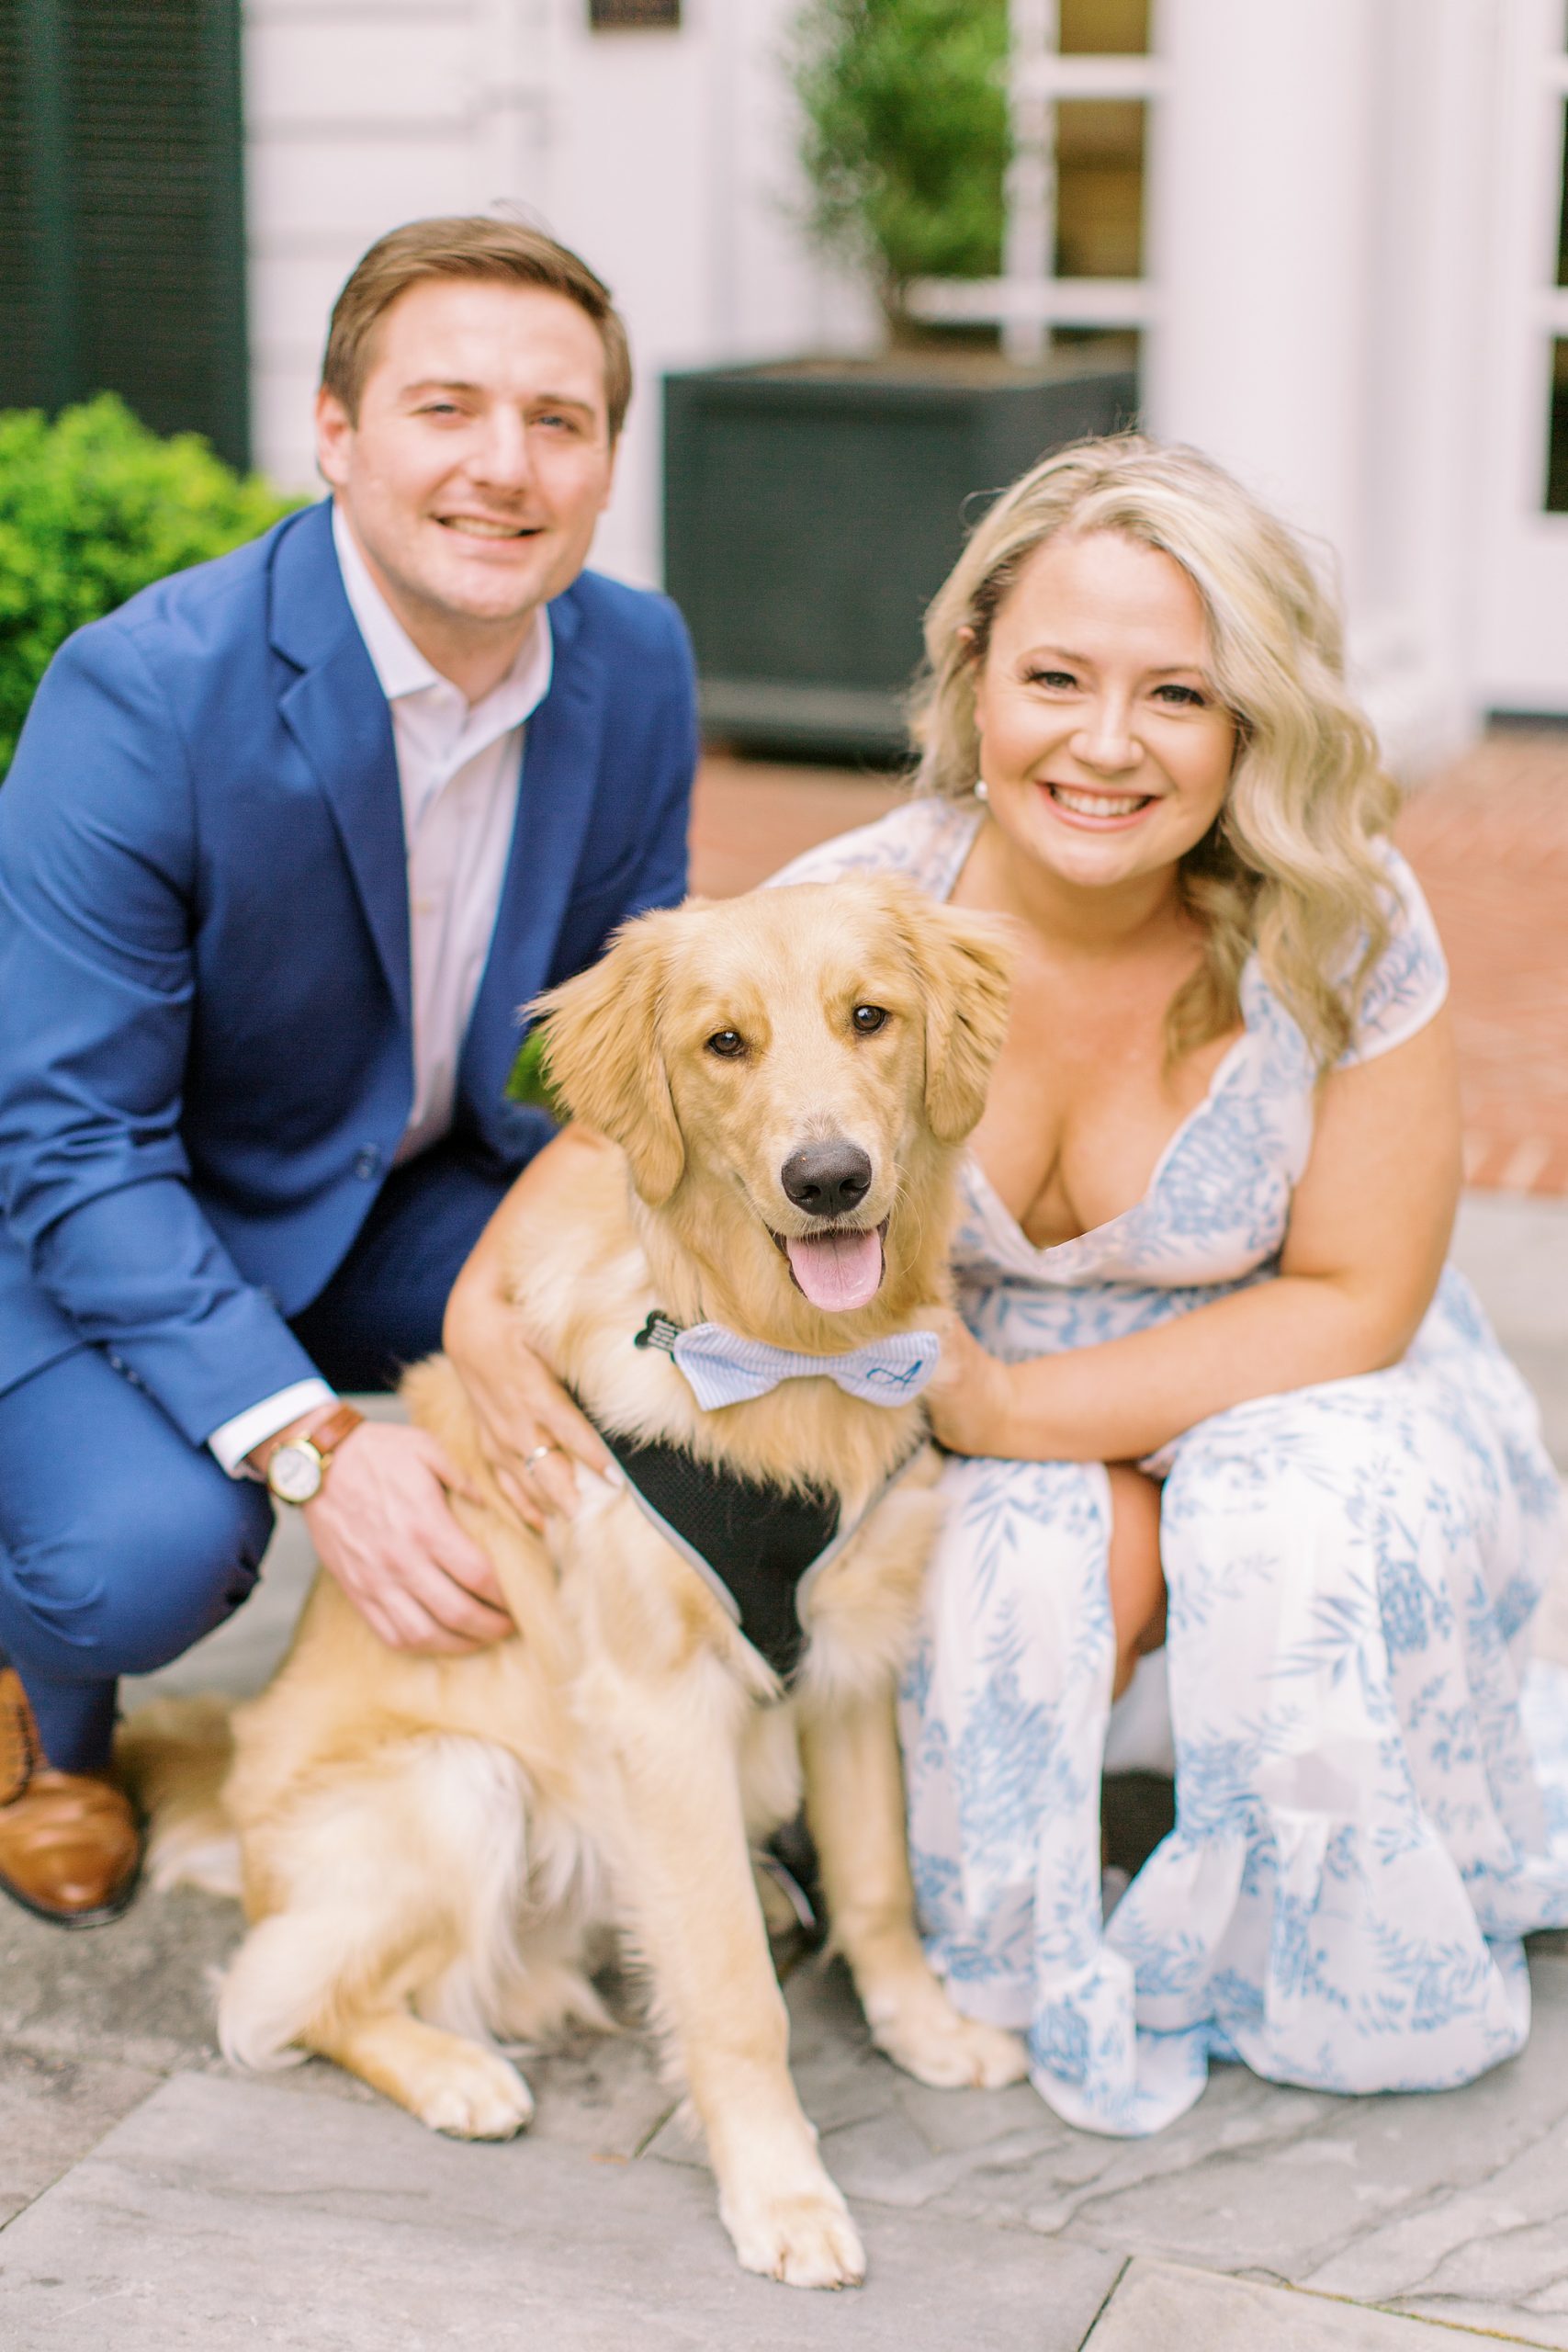 bride and groom sit on step with dog in bowtie